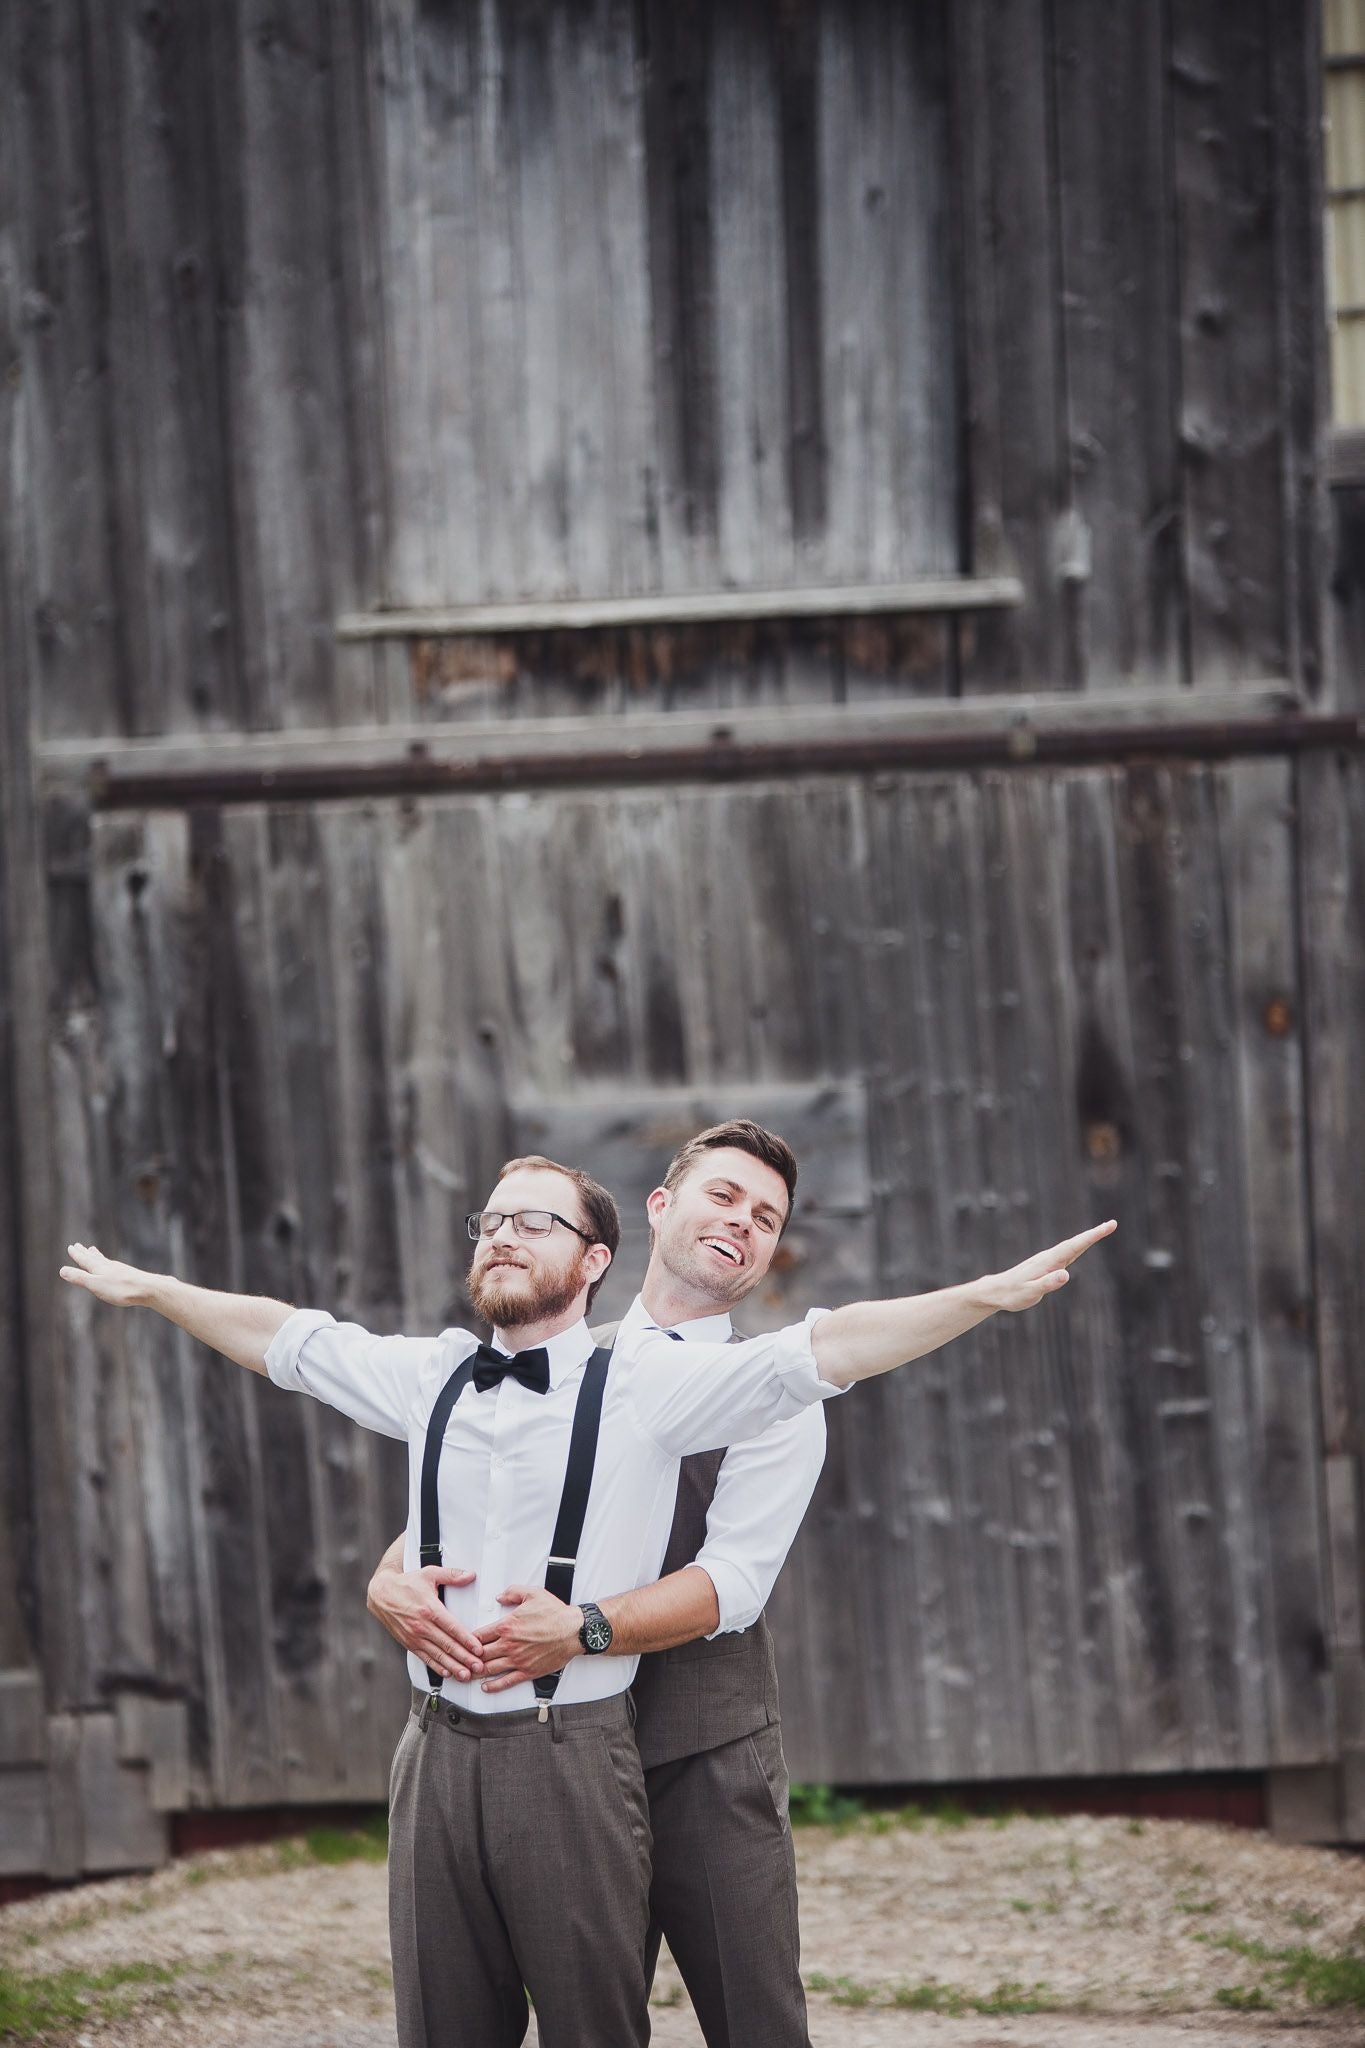 31 Funny Wedding Photo Ideas Worth Stealing Amazepaperie 9332